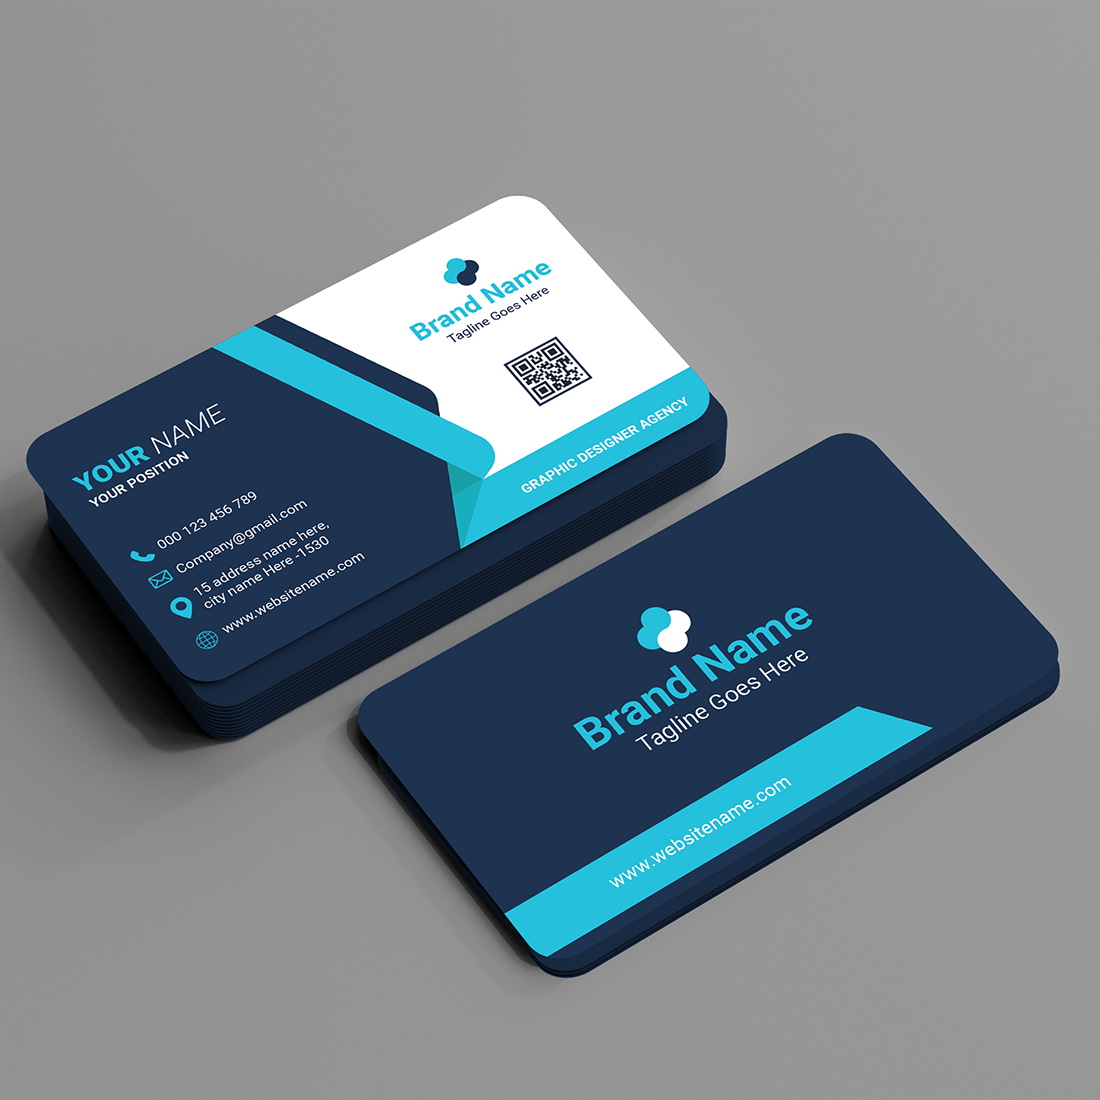 Business card with a blue and white design.